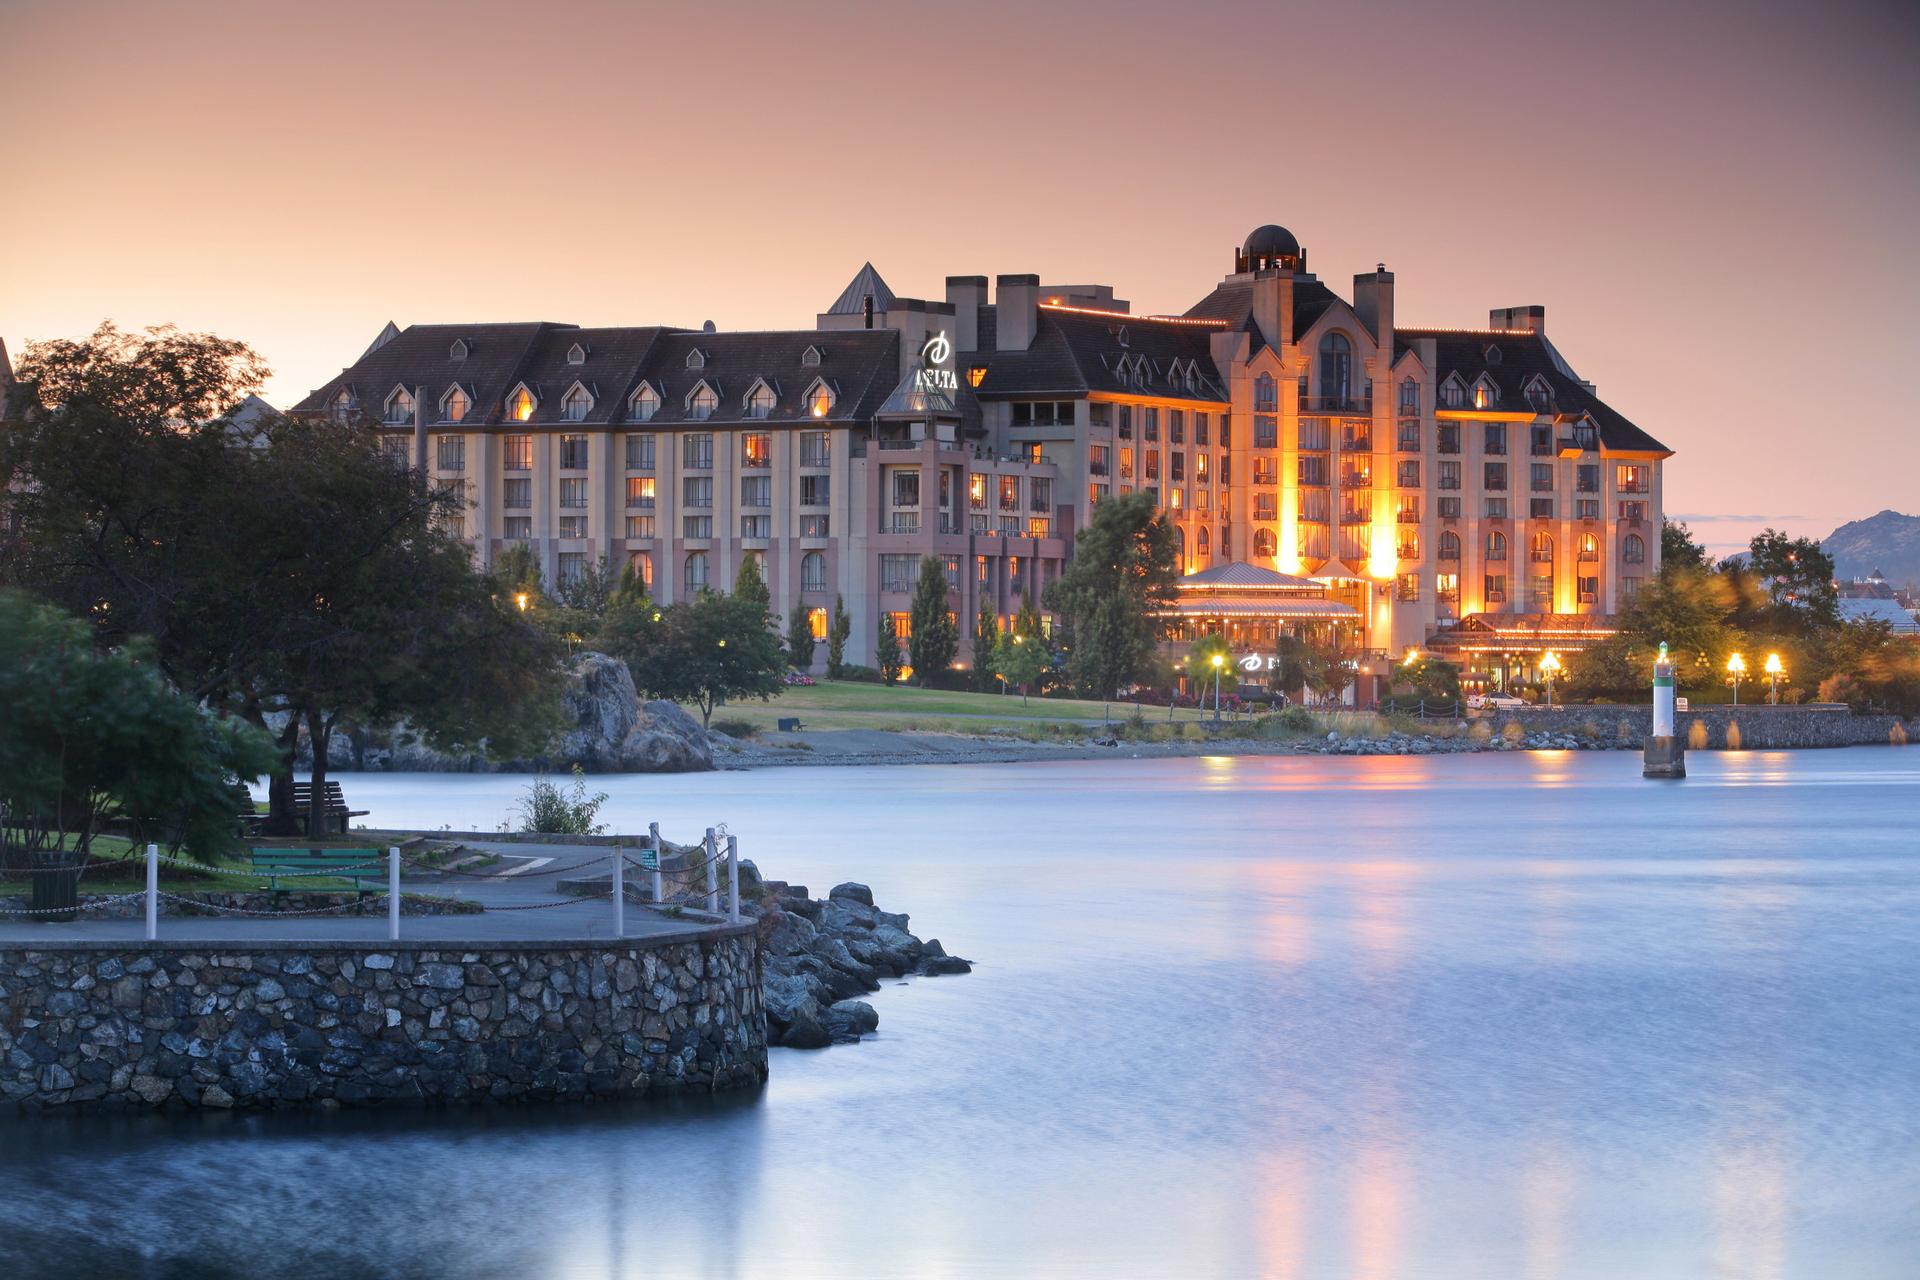 Enjoy our Waterfront Resort in the City with spectacular views of Victoria's Inner Harbour.